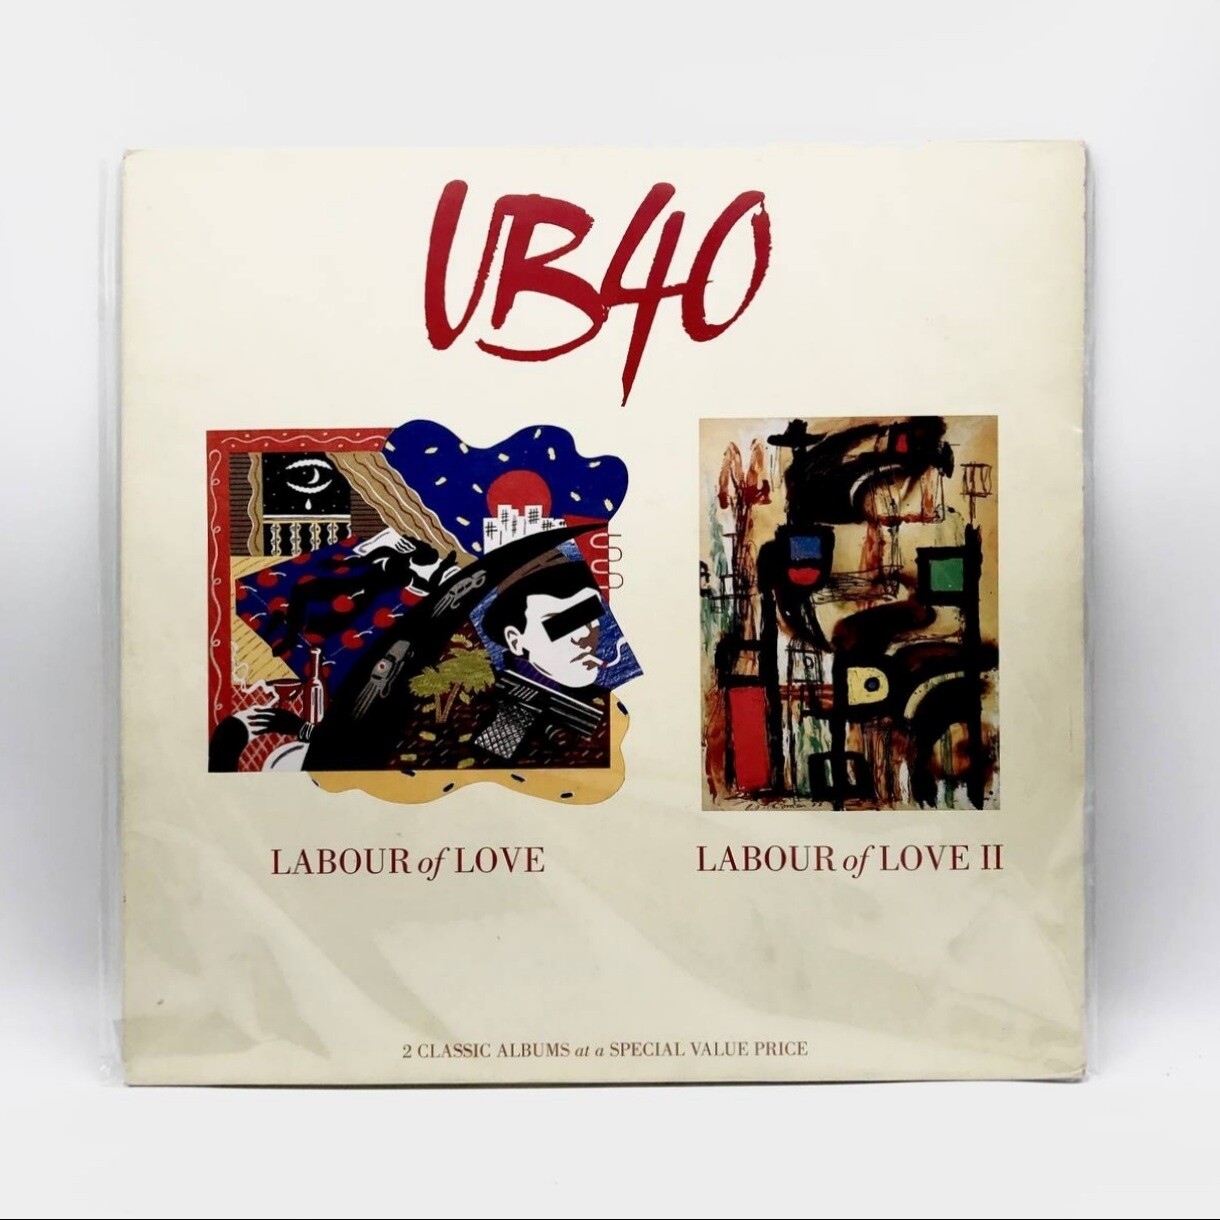 [USED] UB40 -LABOUR OF LOVE & LABOUR OF LOVE II- 2XLP